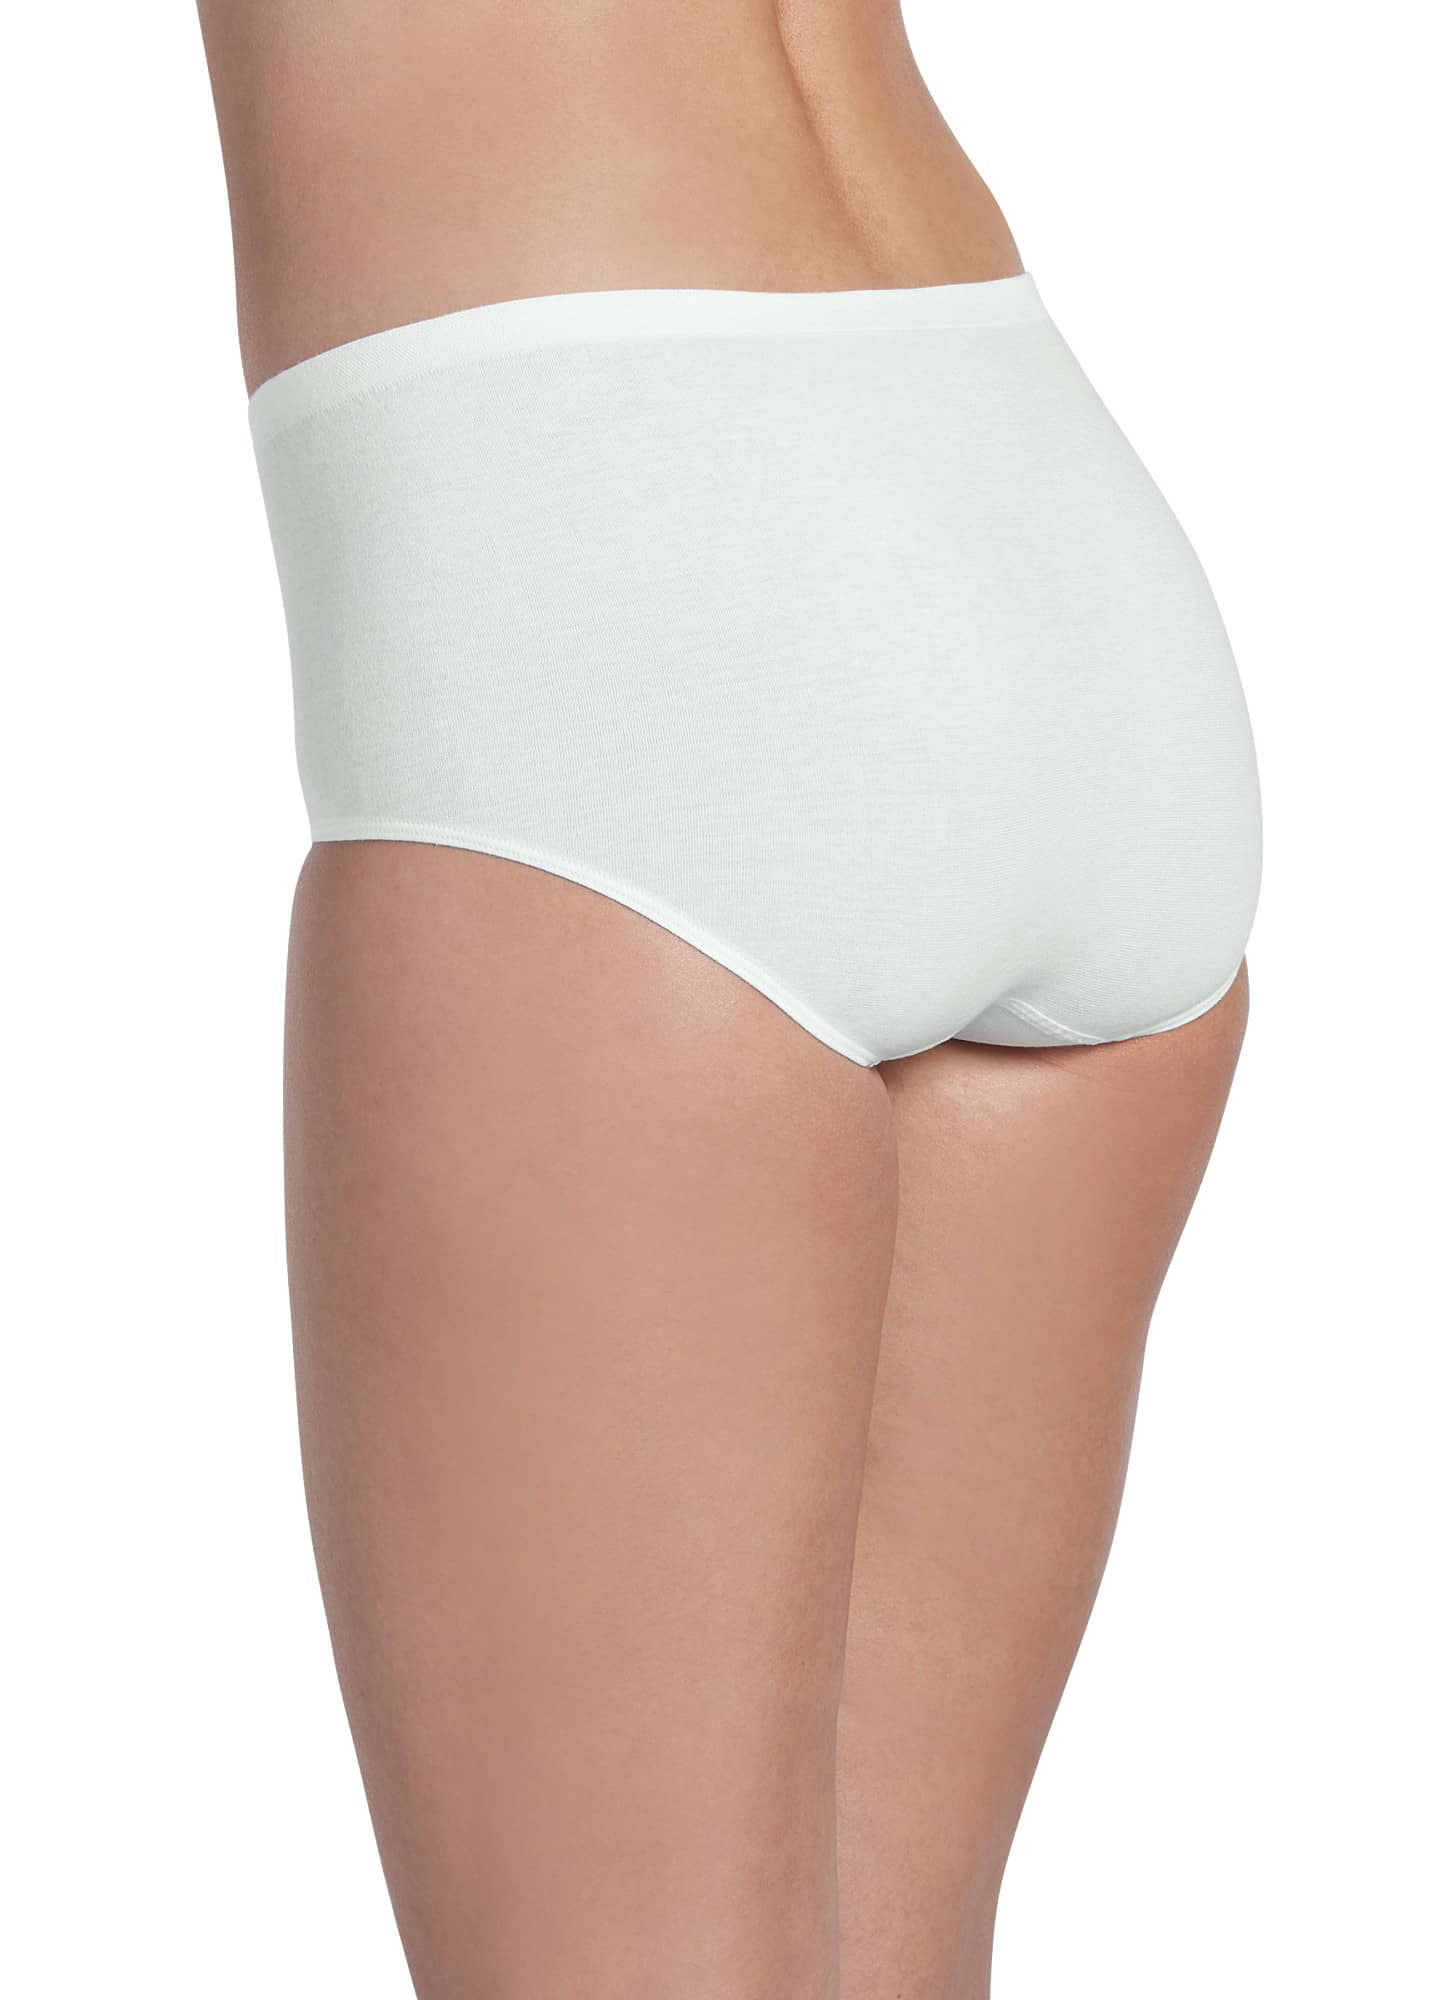 Women's Briefs 100% Cotton-WHT ONLY (3pc) - Wilson Inmate Package Program